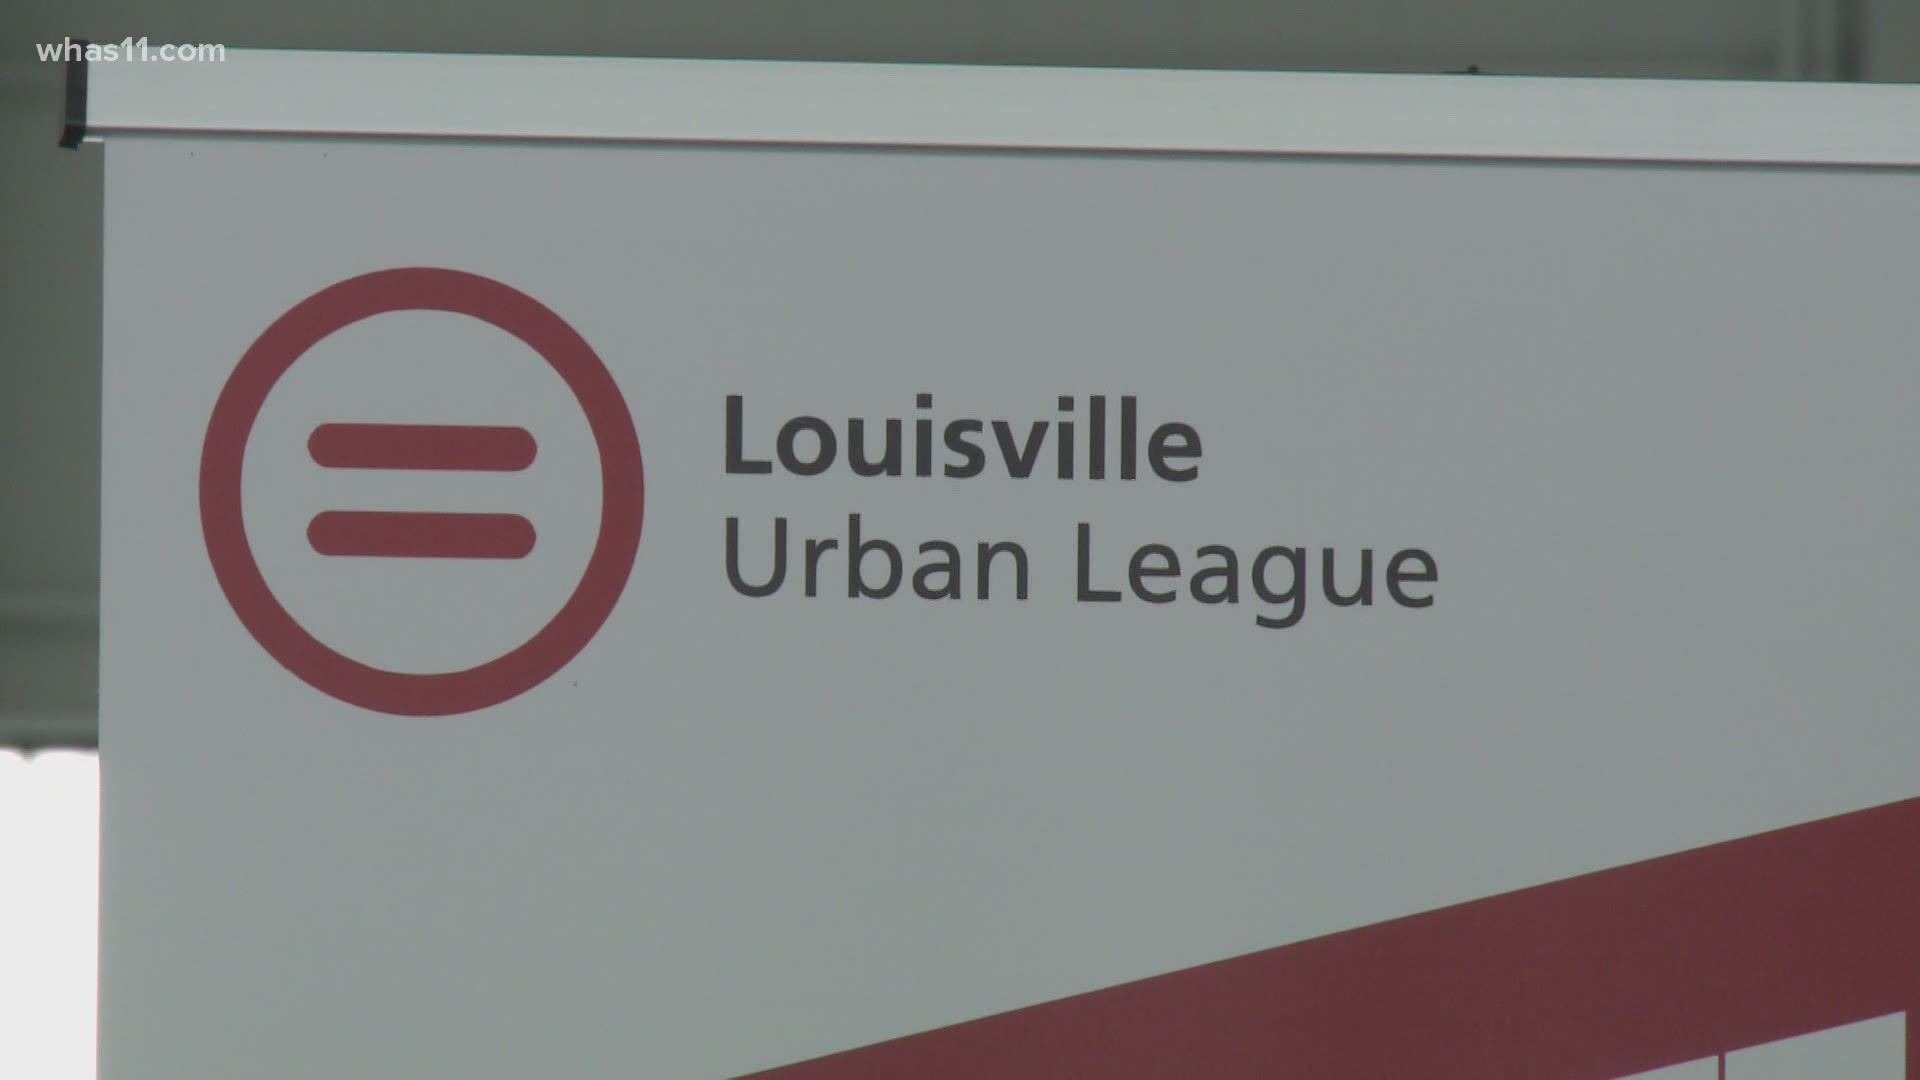 Kentuckiana Builds is a program focused on putting minorities and women in the construction field. The Urban League was just granted money to continue the program.